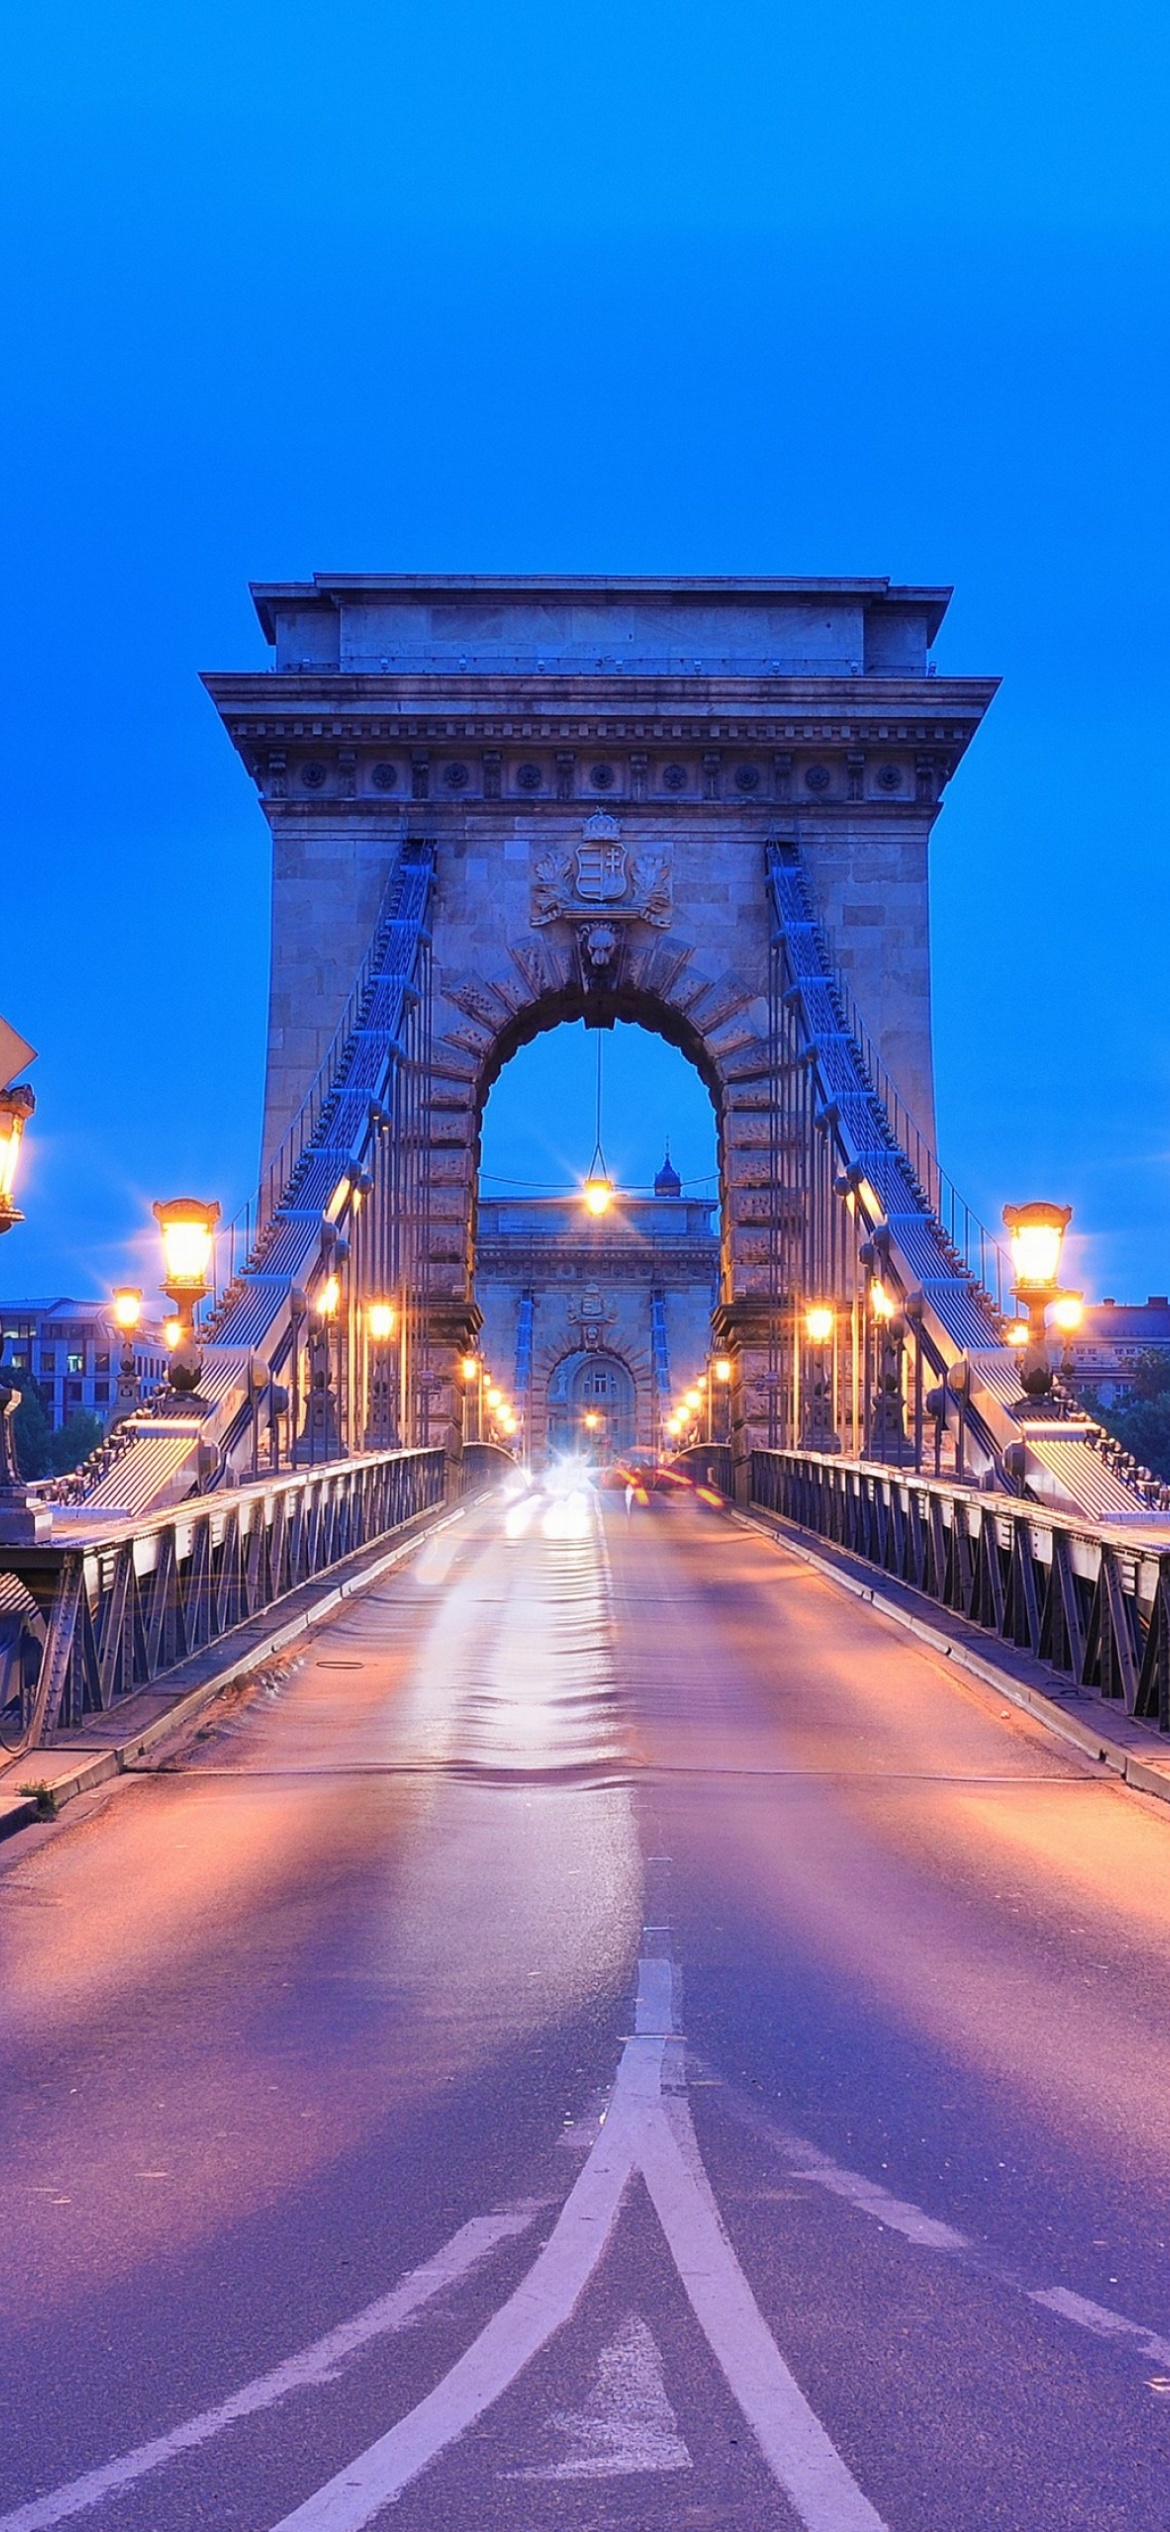 Budapest: A chain bridge that spans the River Danube between Buda and Pest. 1170x2540 HD Wallpaper.